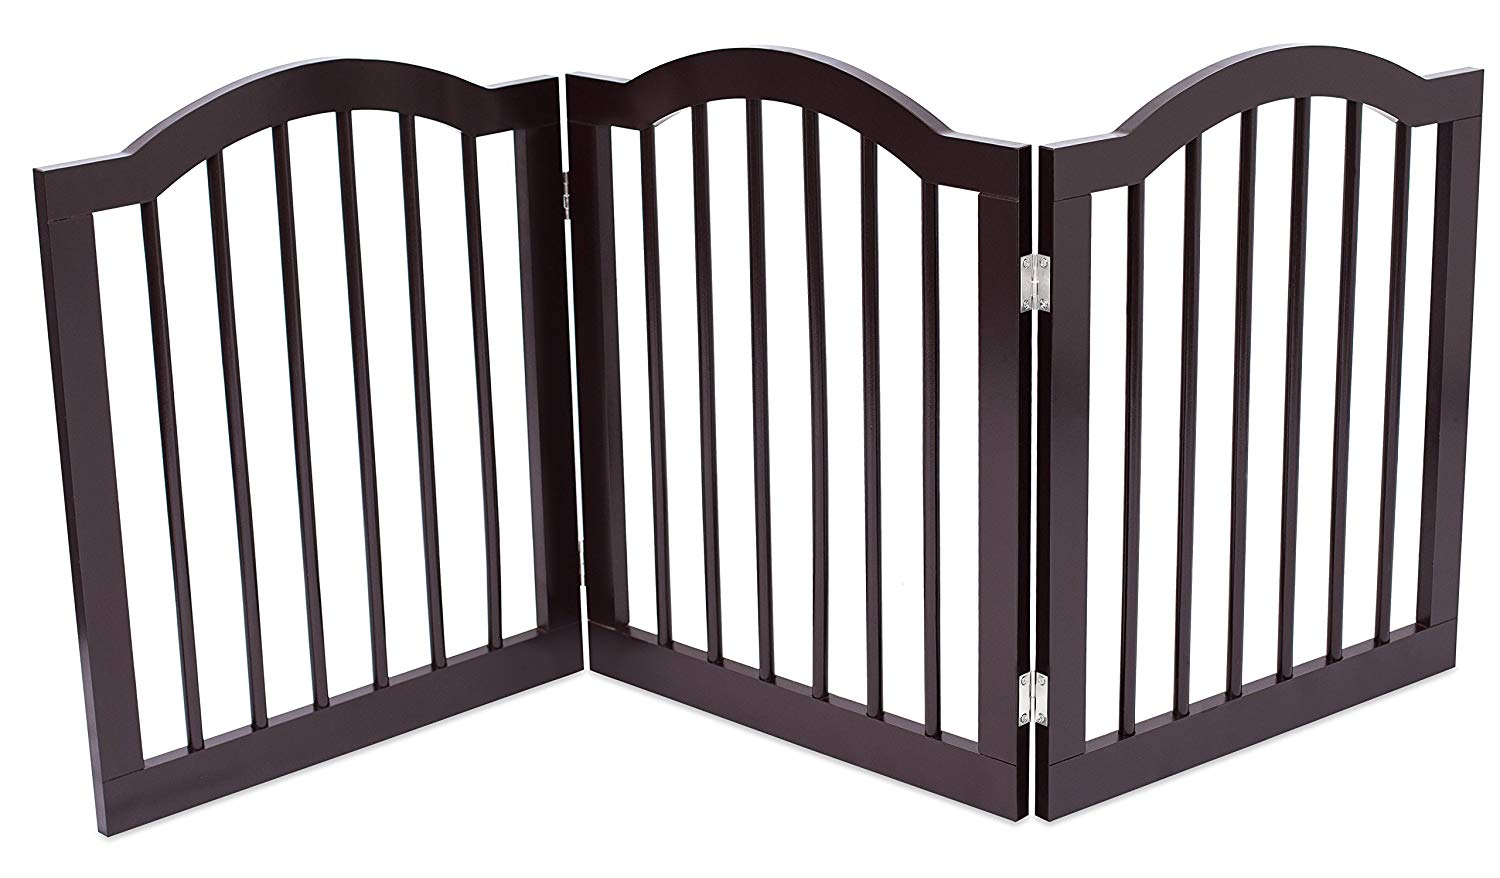 Internet's Best Pet Gate with Arched Top - 3 Panel - 24" Tall - Espresso - image 1 of 8